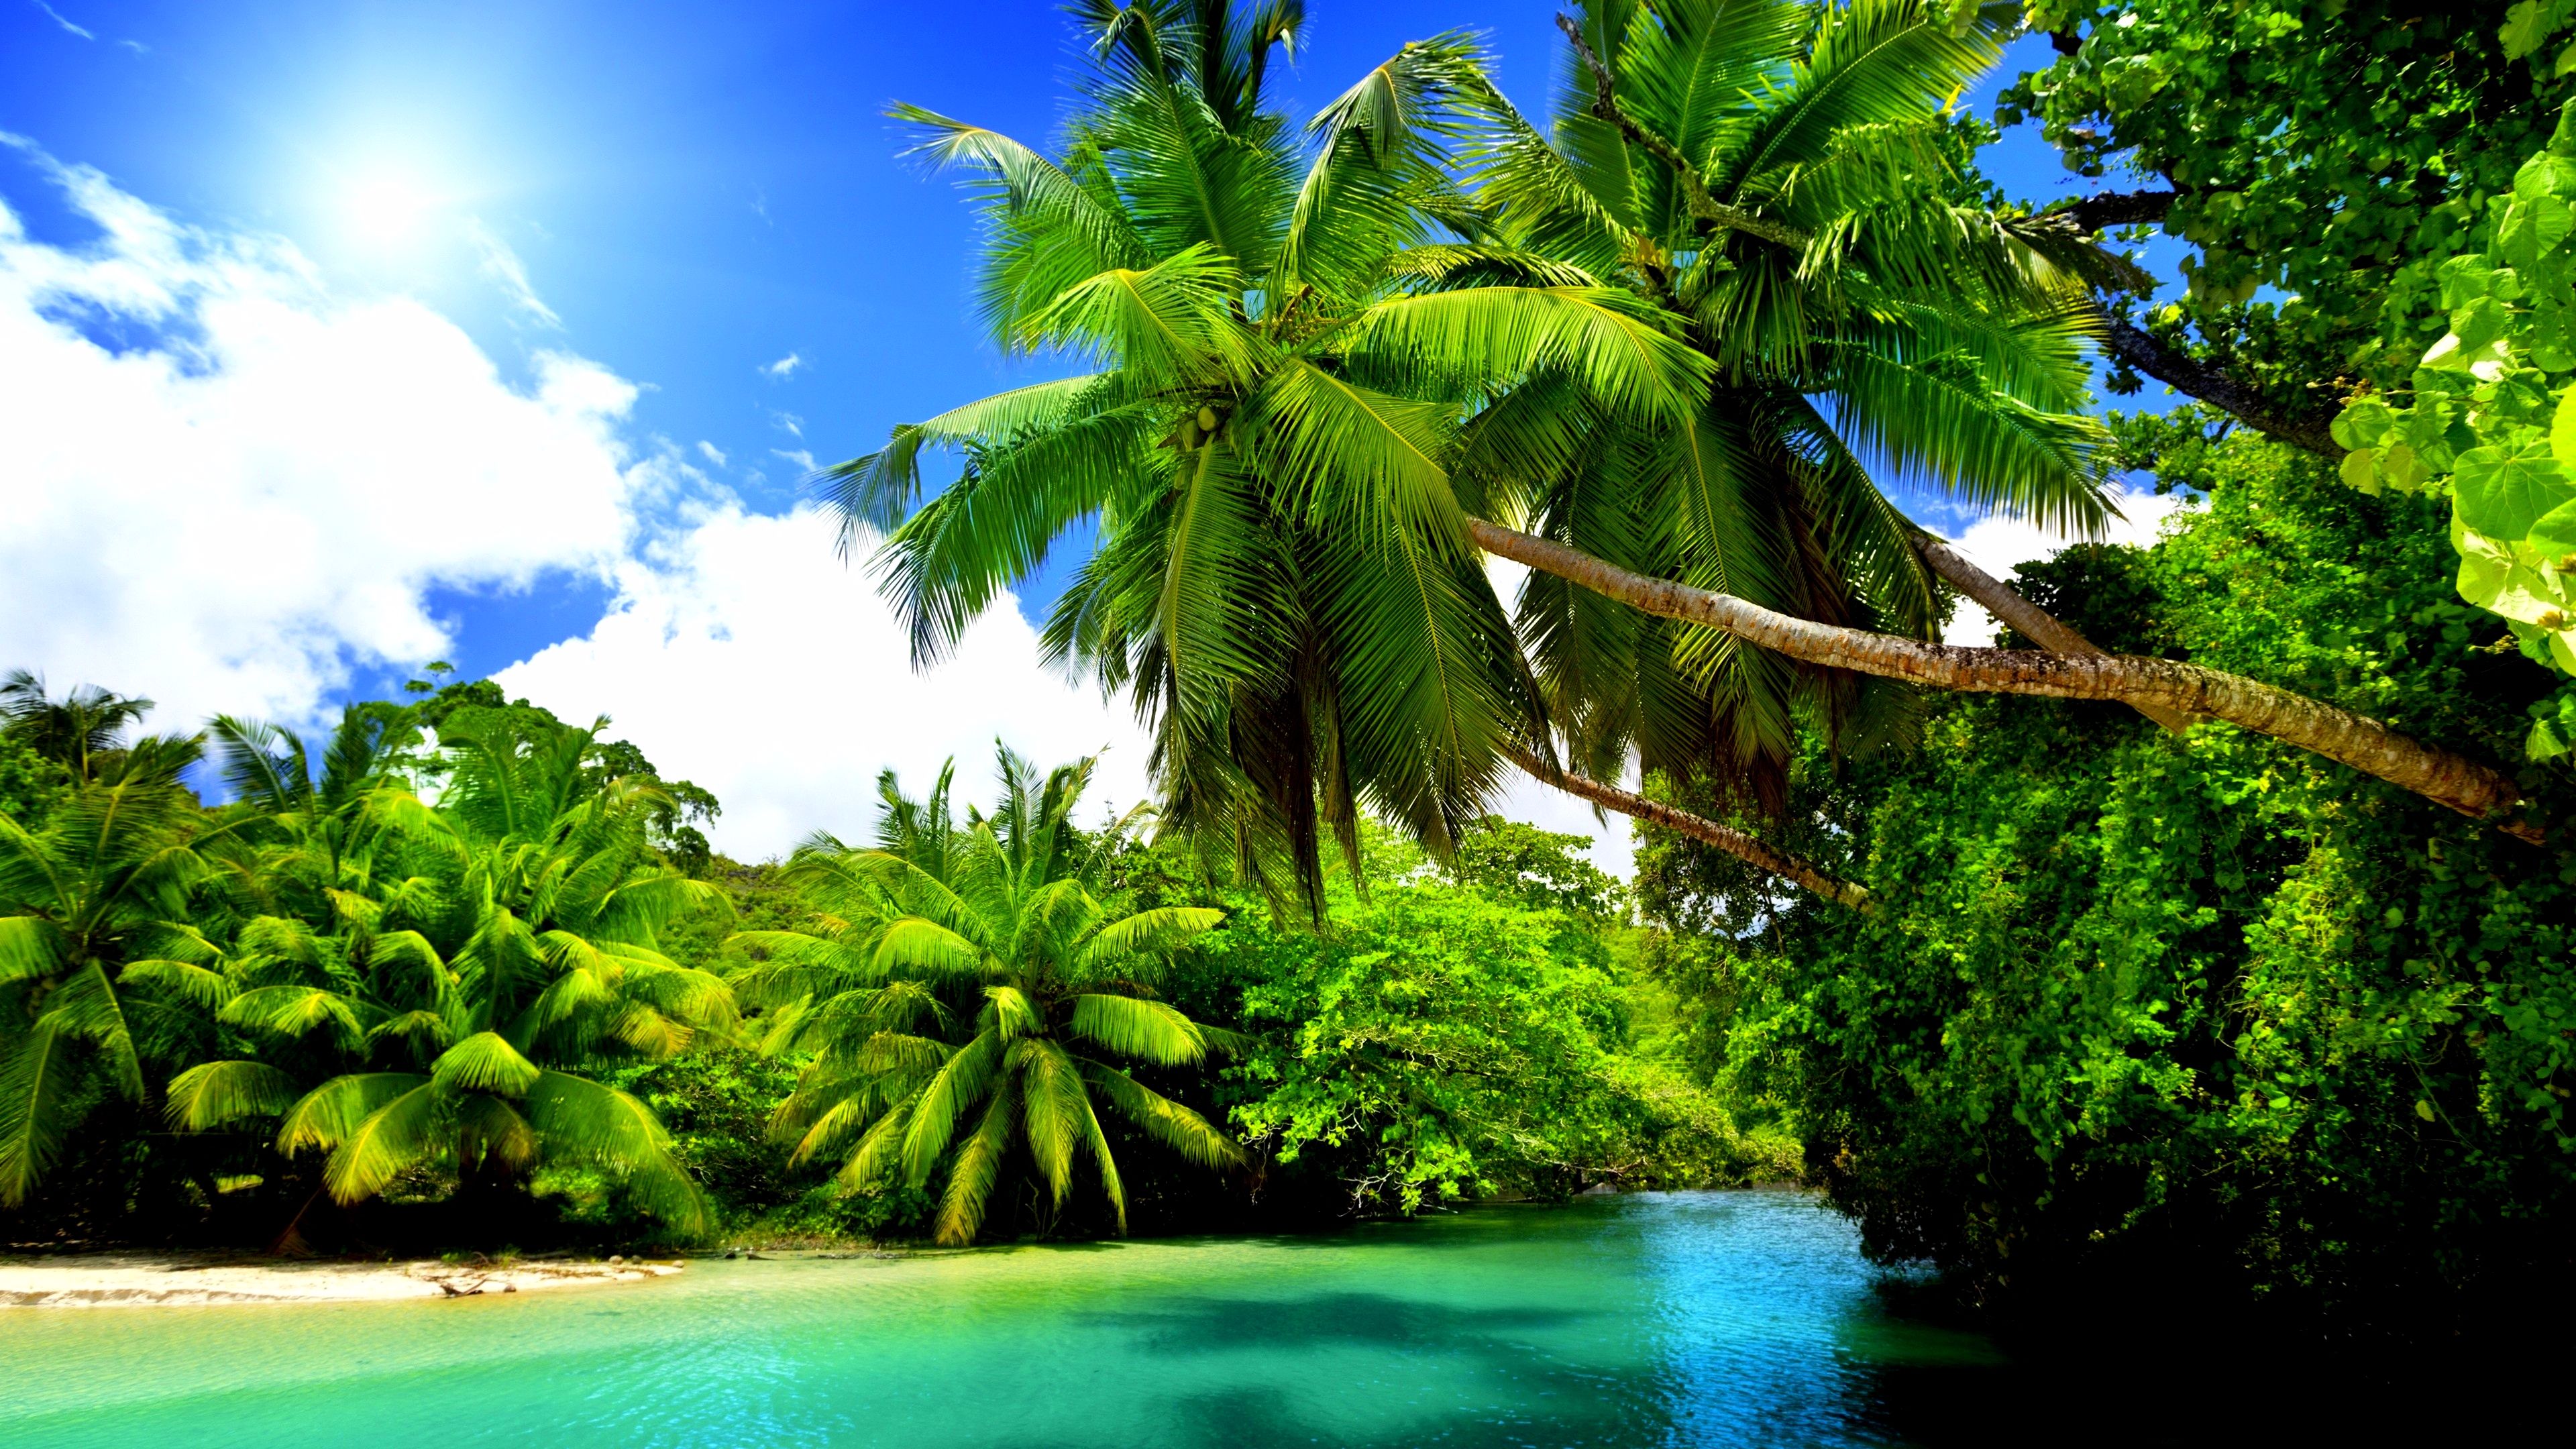 Tropical 4K Free Quality Backgrounds for Templates - PPT Backgrounds